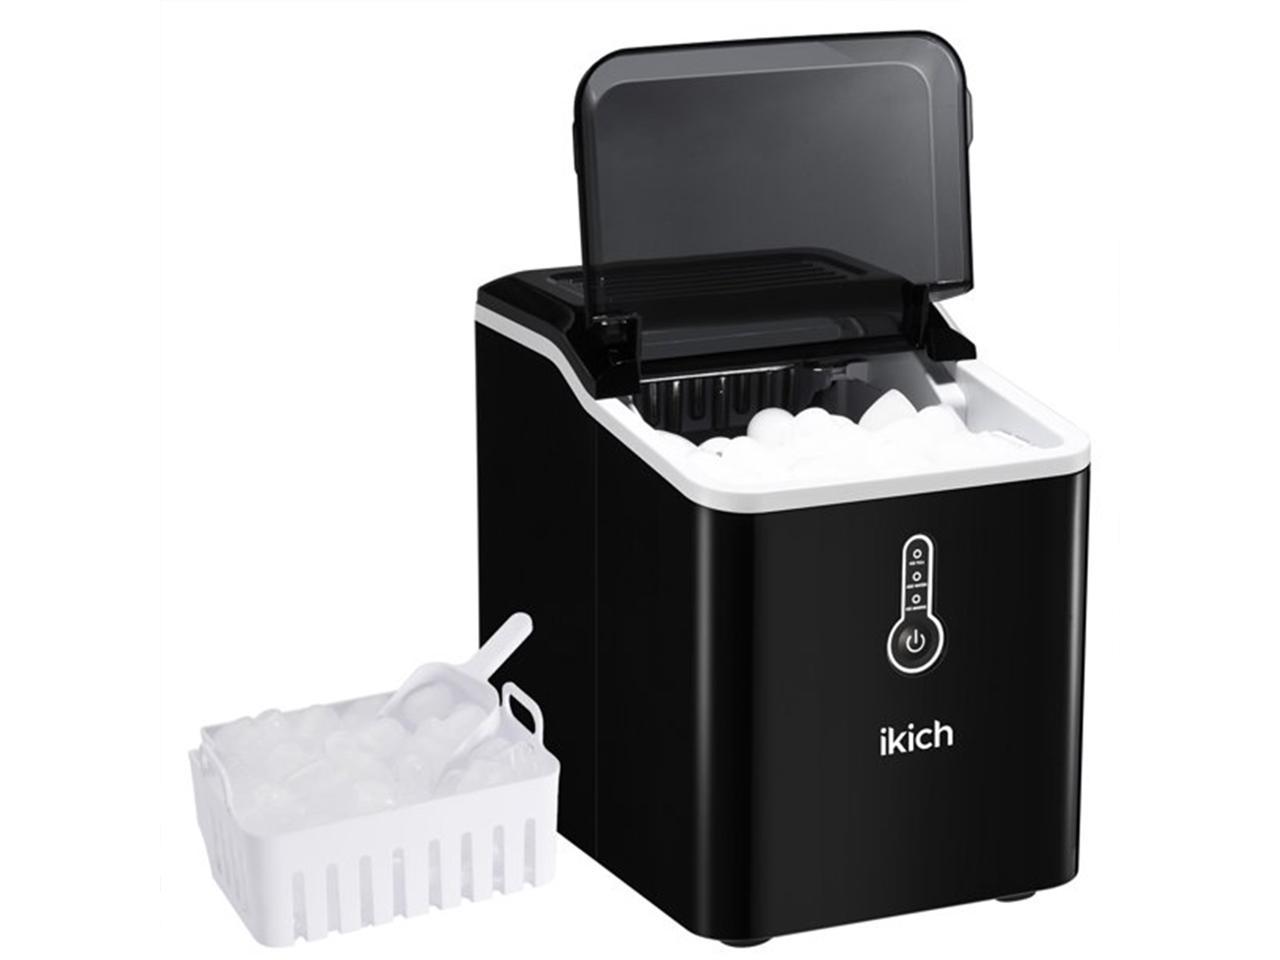 Semi-Auto Cleaning, Ice Scoop & 1.5 lb Basket 26 lbs in Ice 24 Hrs & 2 Size TRUSTECH Ice Maker Portable Ice Machine Countertop Ice Machine for Home Camp Party 9 Ice Cubes Ready in 6 Mins S/L 